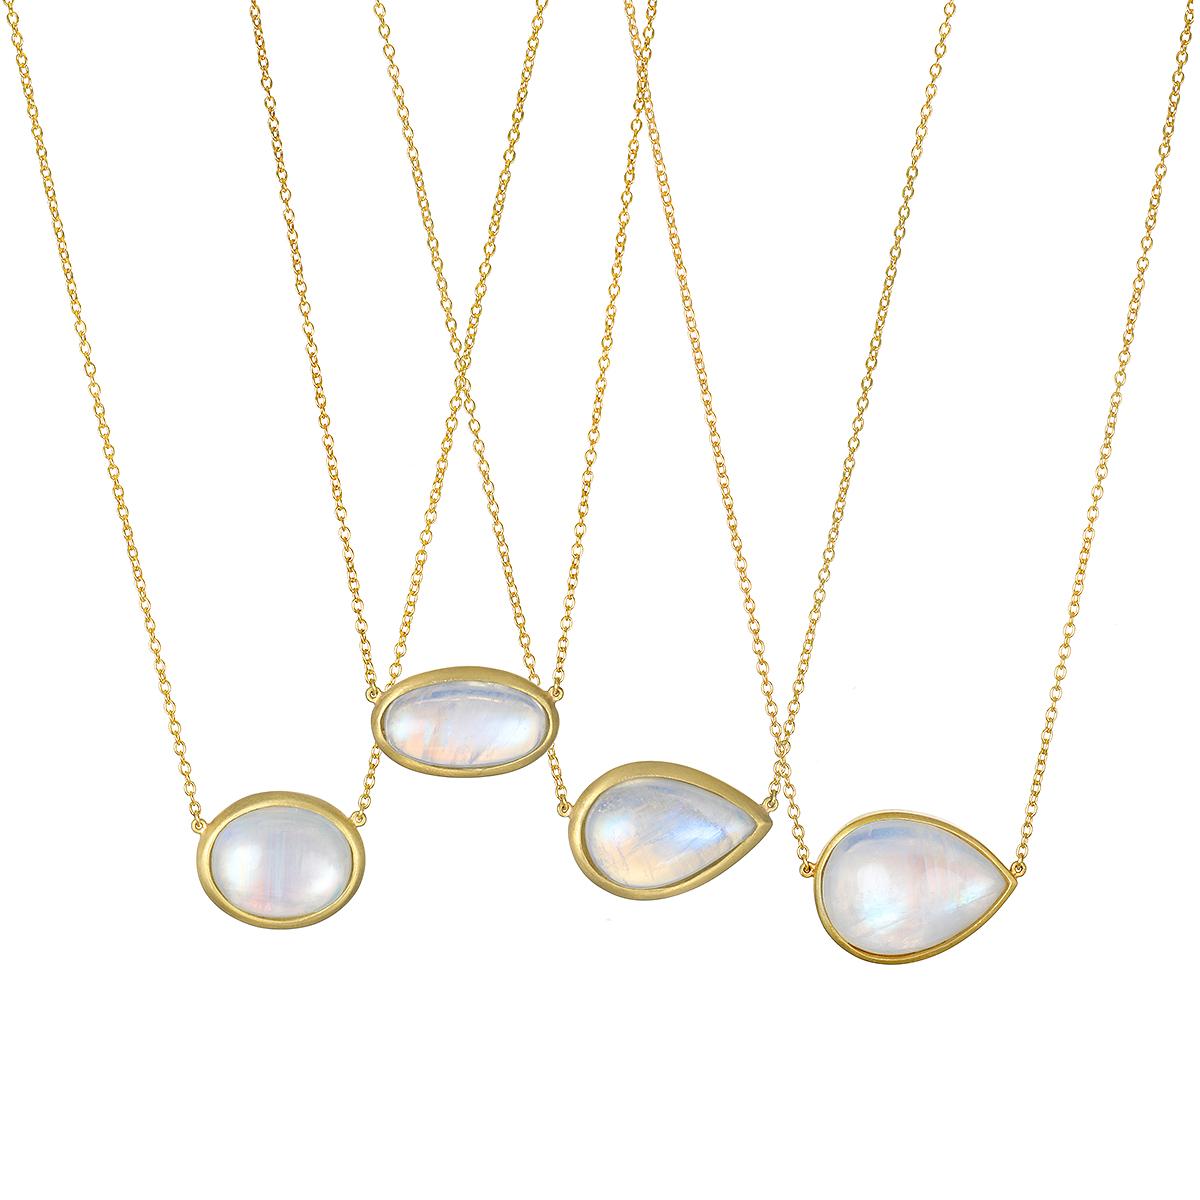 This beautiful Moonstone Bezel Pendant is full of light and reflects beautiful translucent blue hues. The shape, polish, and matte gold finish enhances the moonstone's striking rainbow effect. Handcrafted in 18k gold* with a classic jump ring bail,